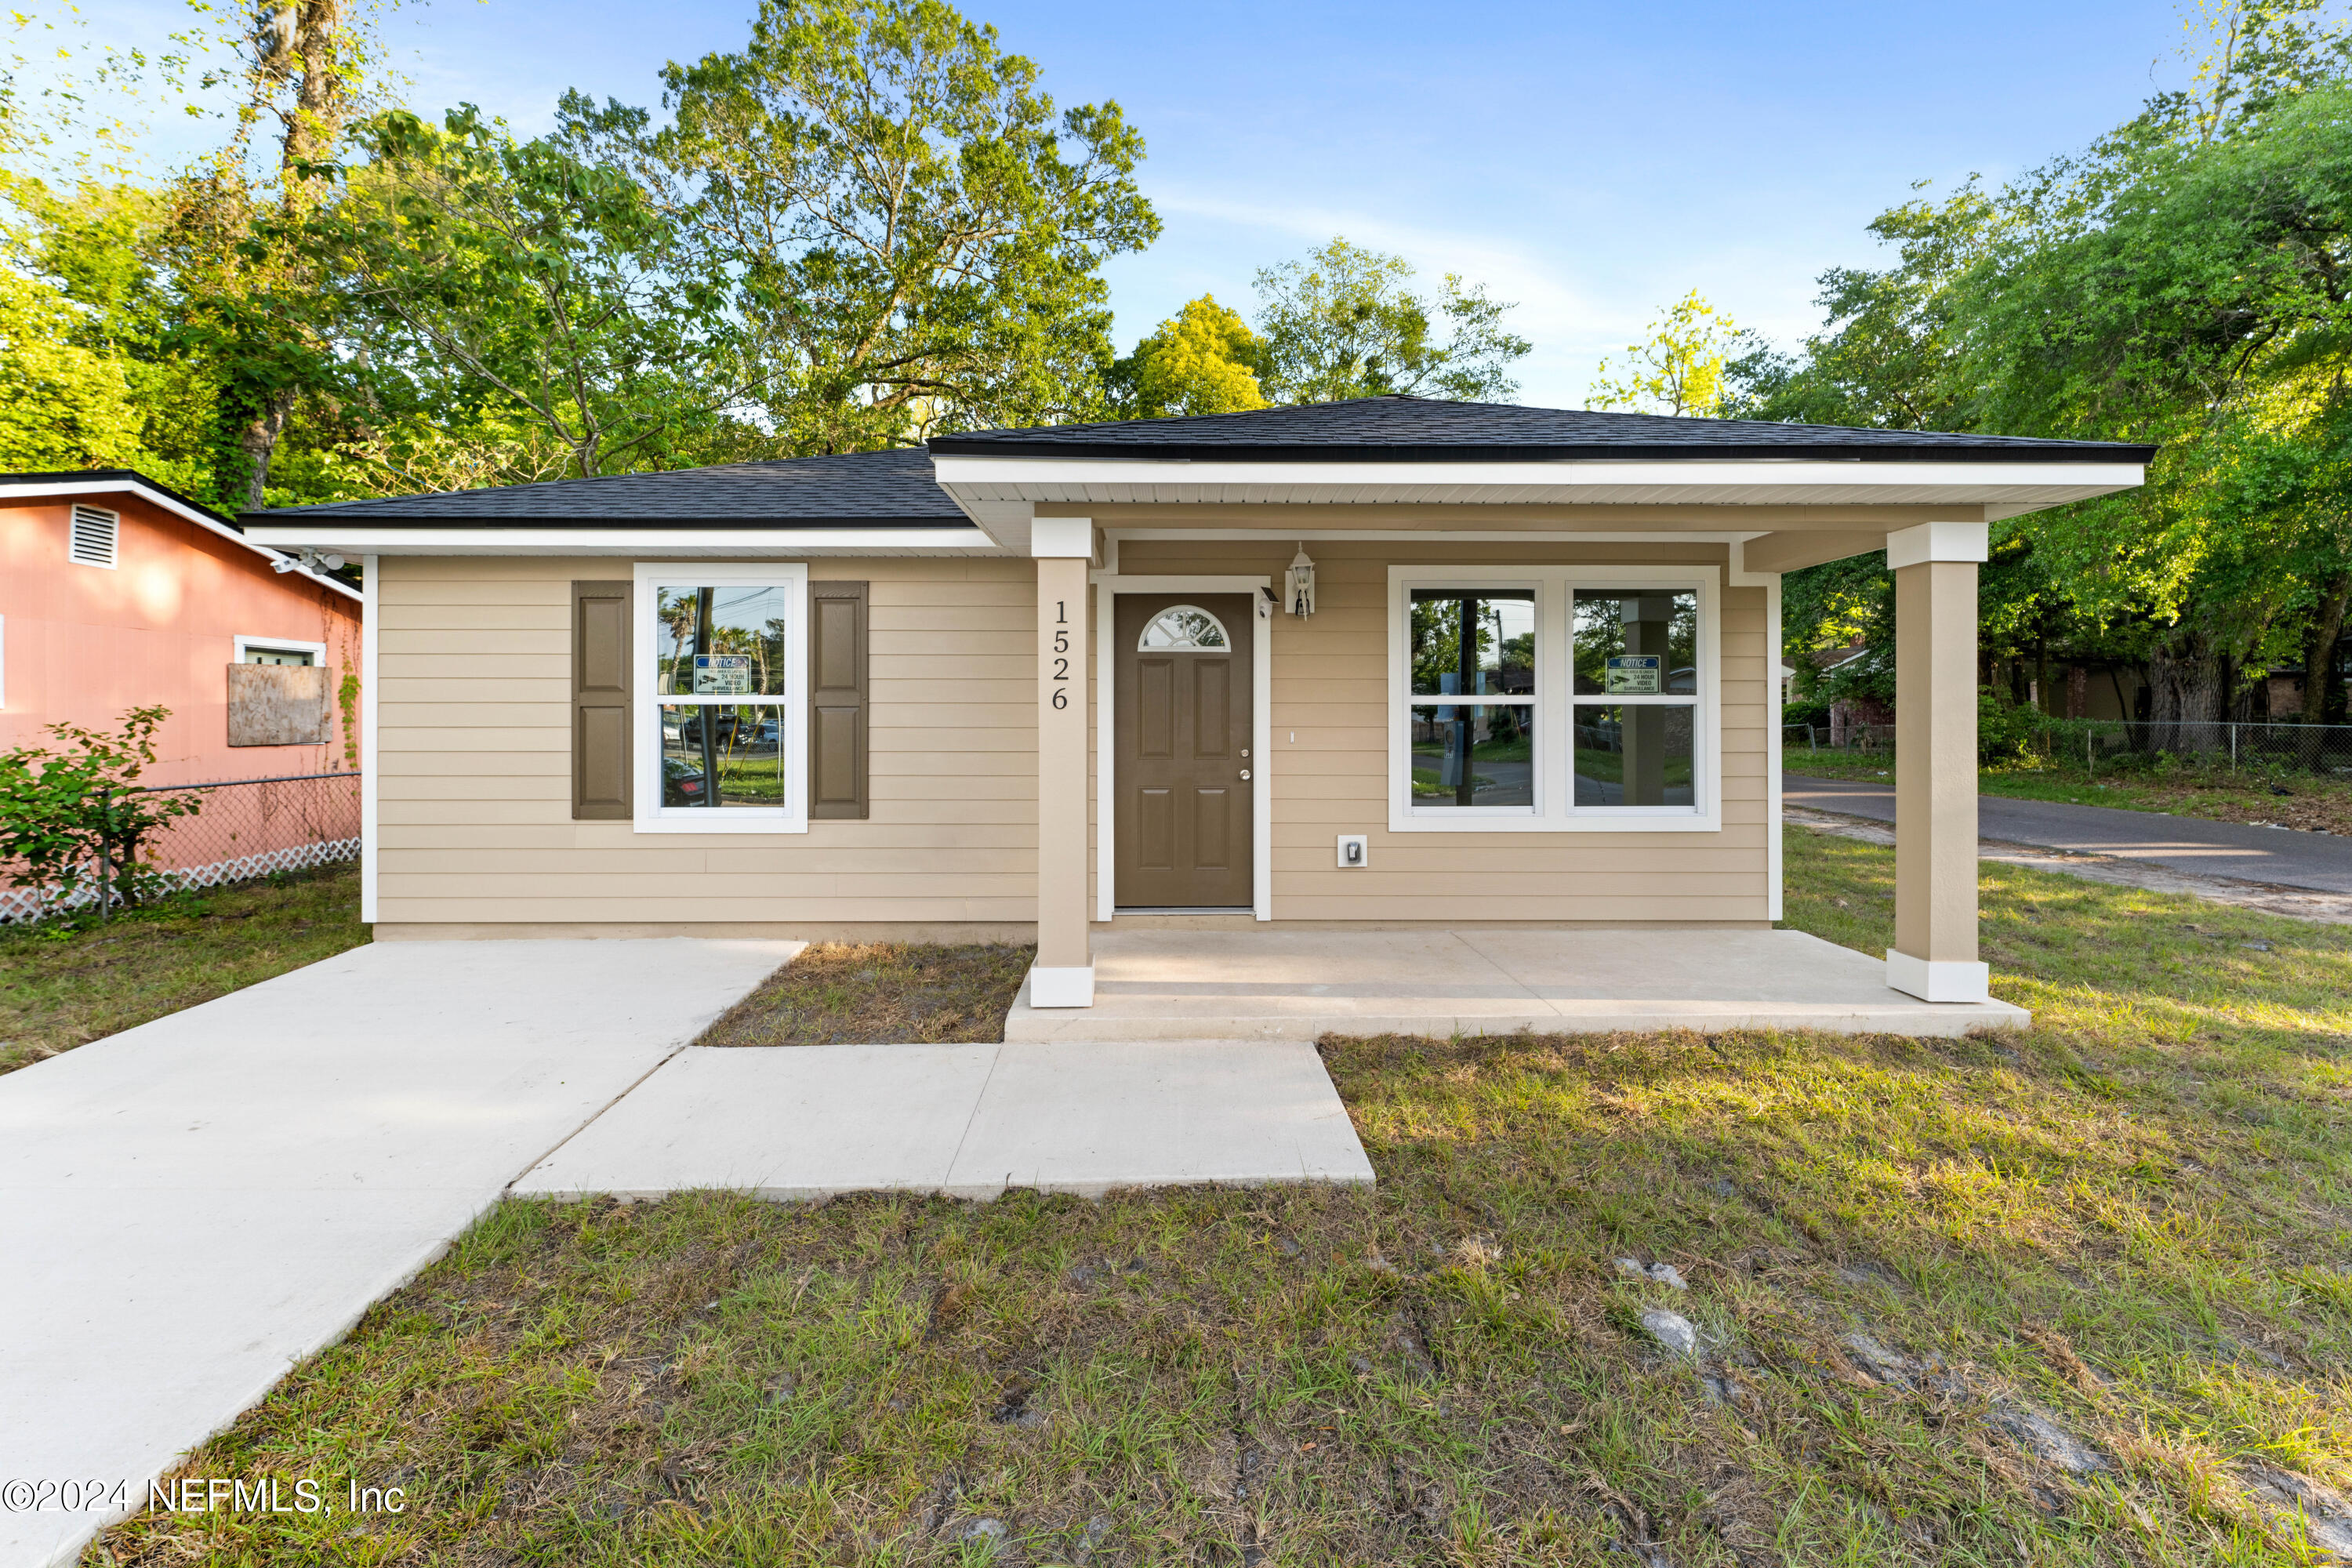 Jacksonville, FL home for sale located at 1526 W 35th Street, Jacksonville, FL 32209